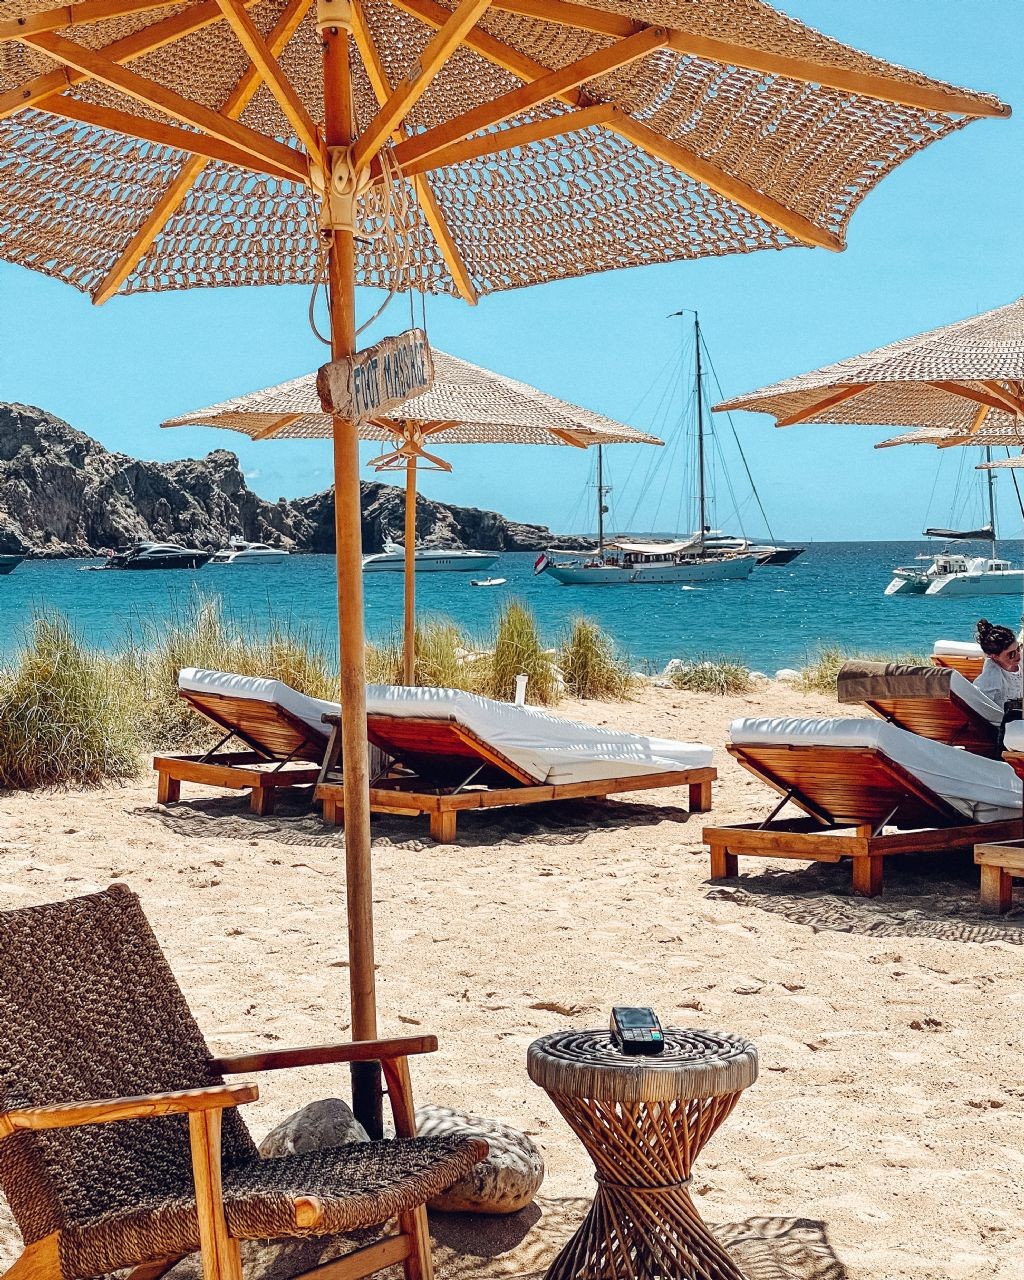 Relaxing on Ibiza's Beaches: Indulge in the island's beautiful beaches. Spend a day lounging on the pristine sands of Playa d'en Bossa, Cala Conta, or Talamanca